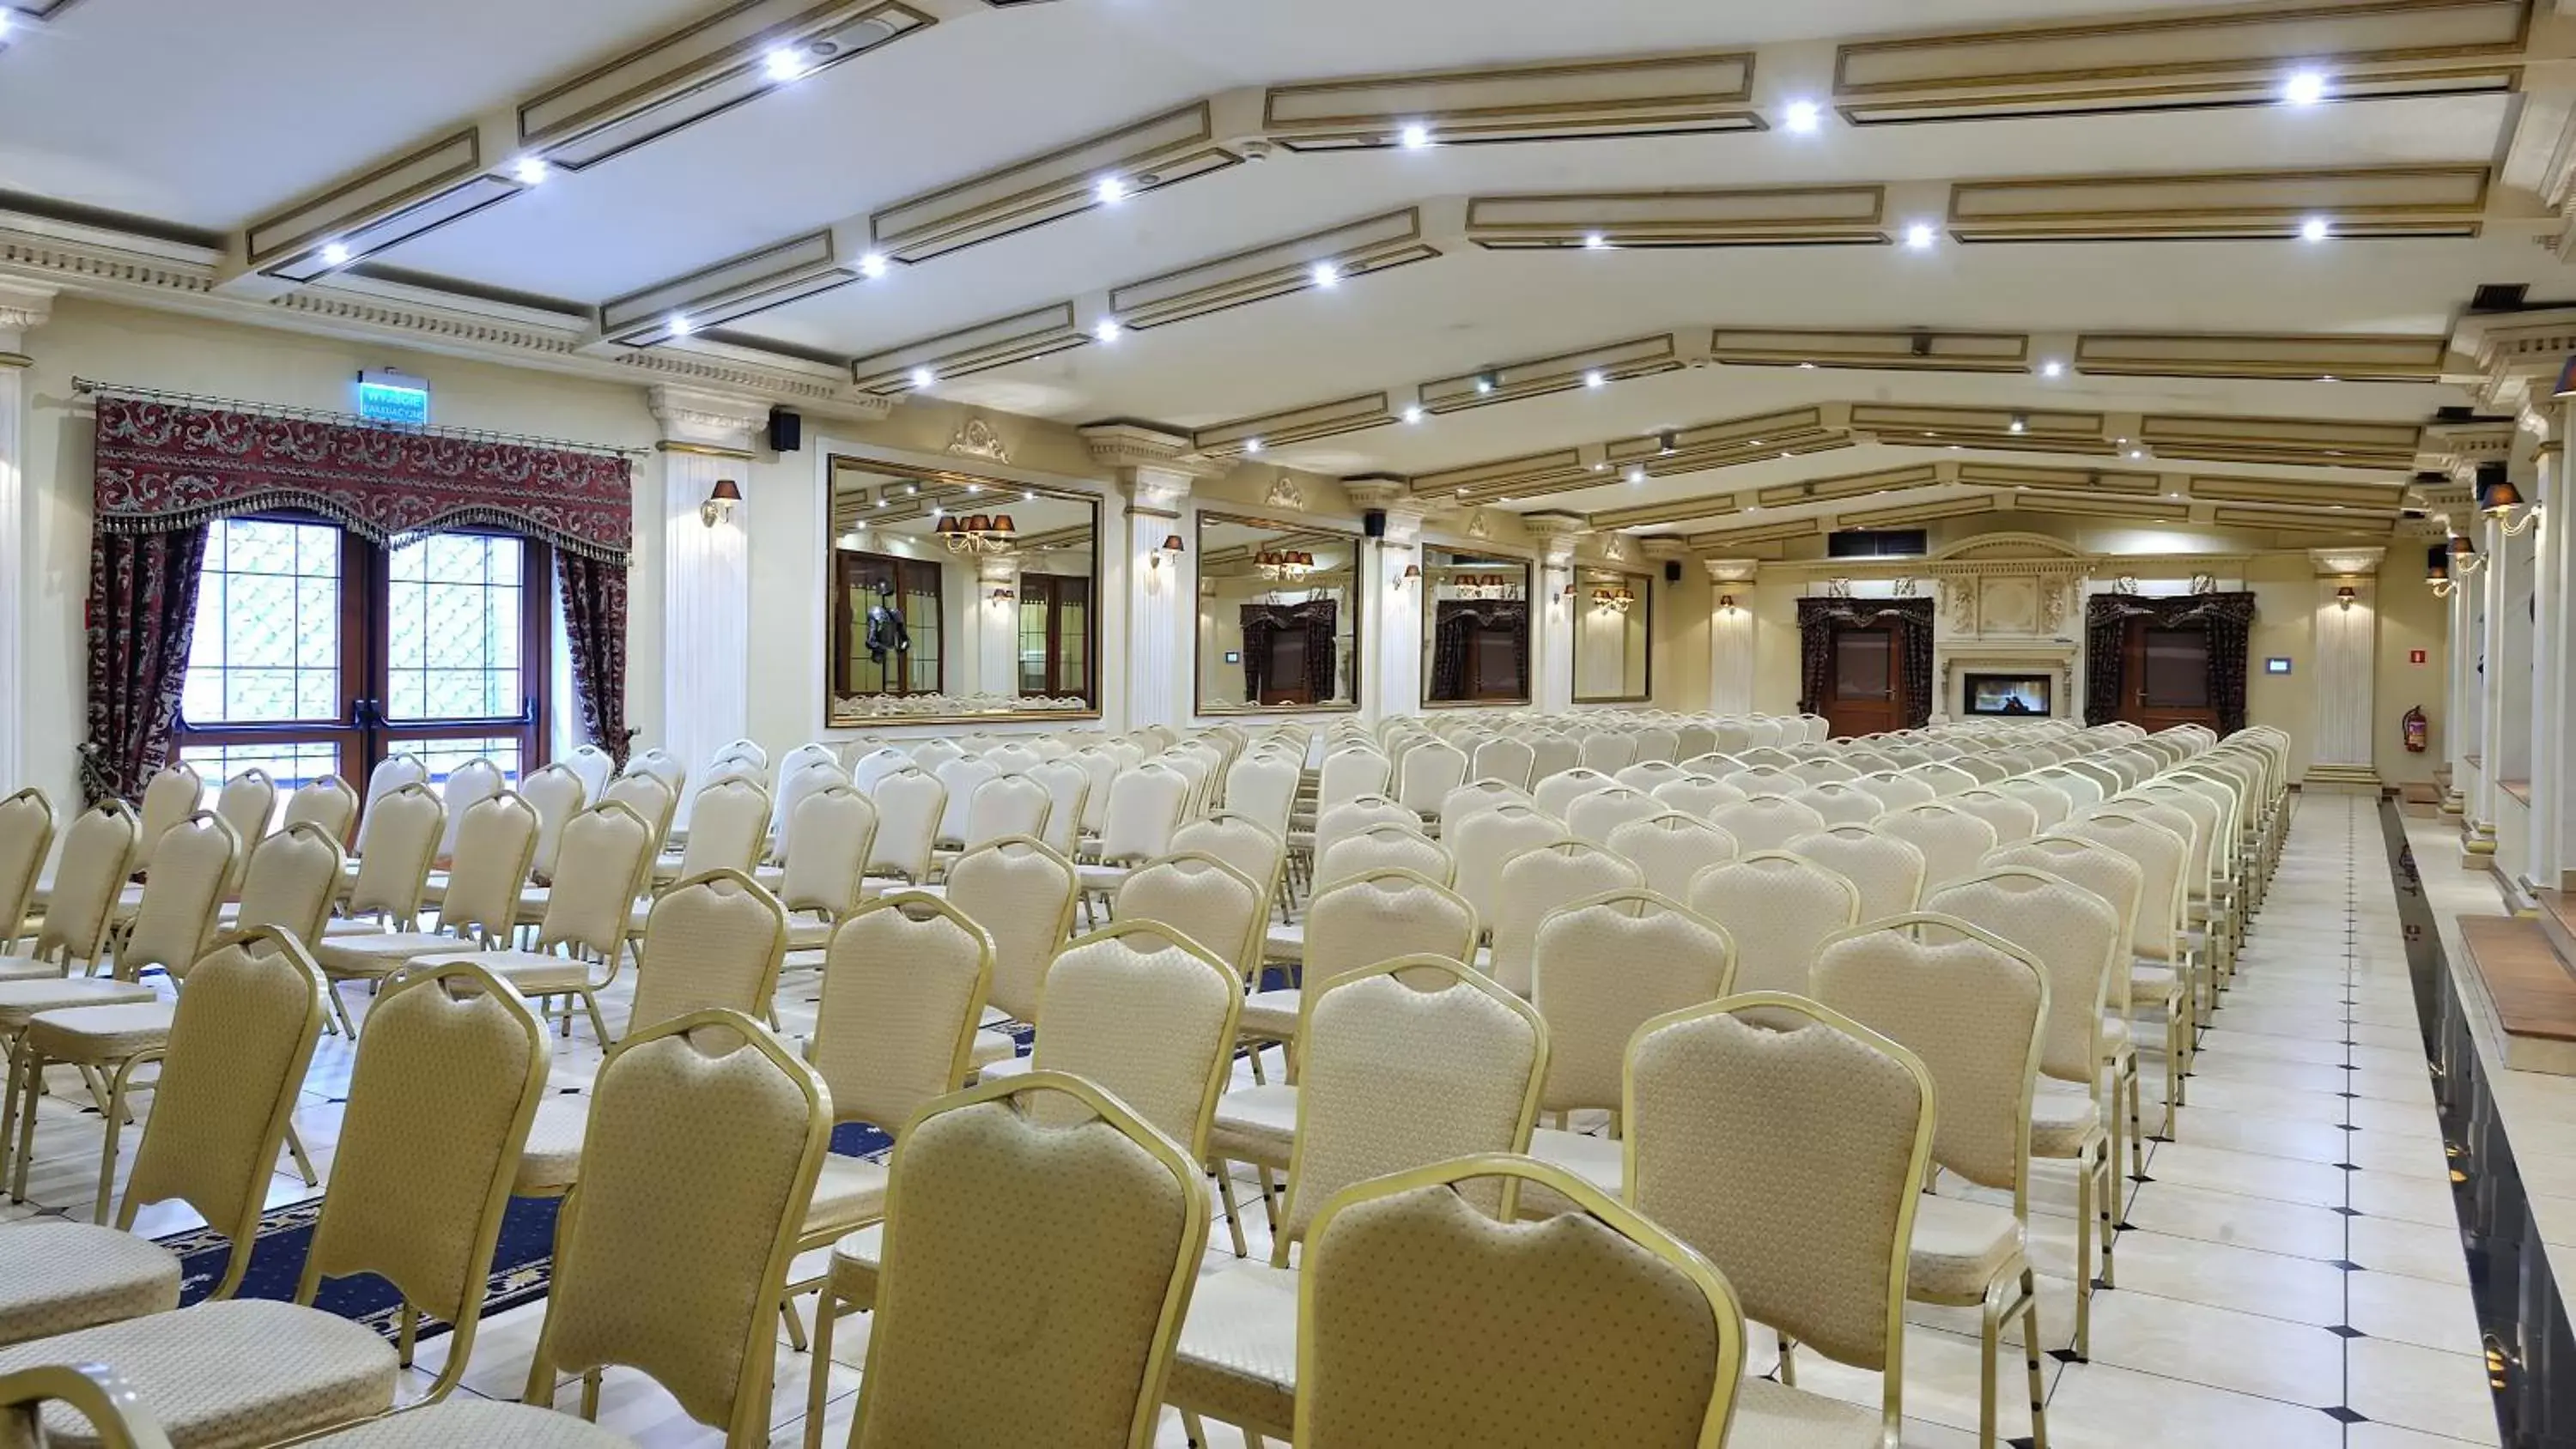 Meeting/conference room, Banquet Facilities in Hotel Diament Arsenal Palace Katowice - Chorzów